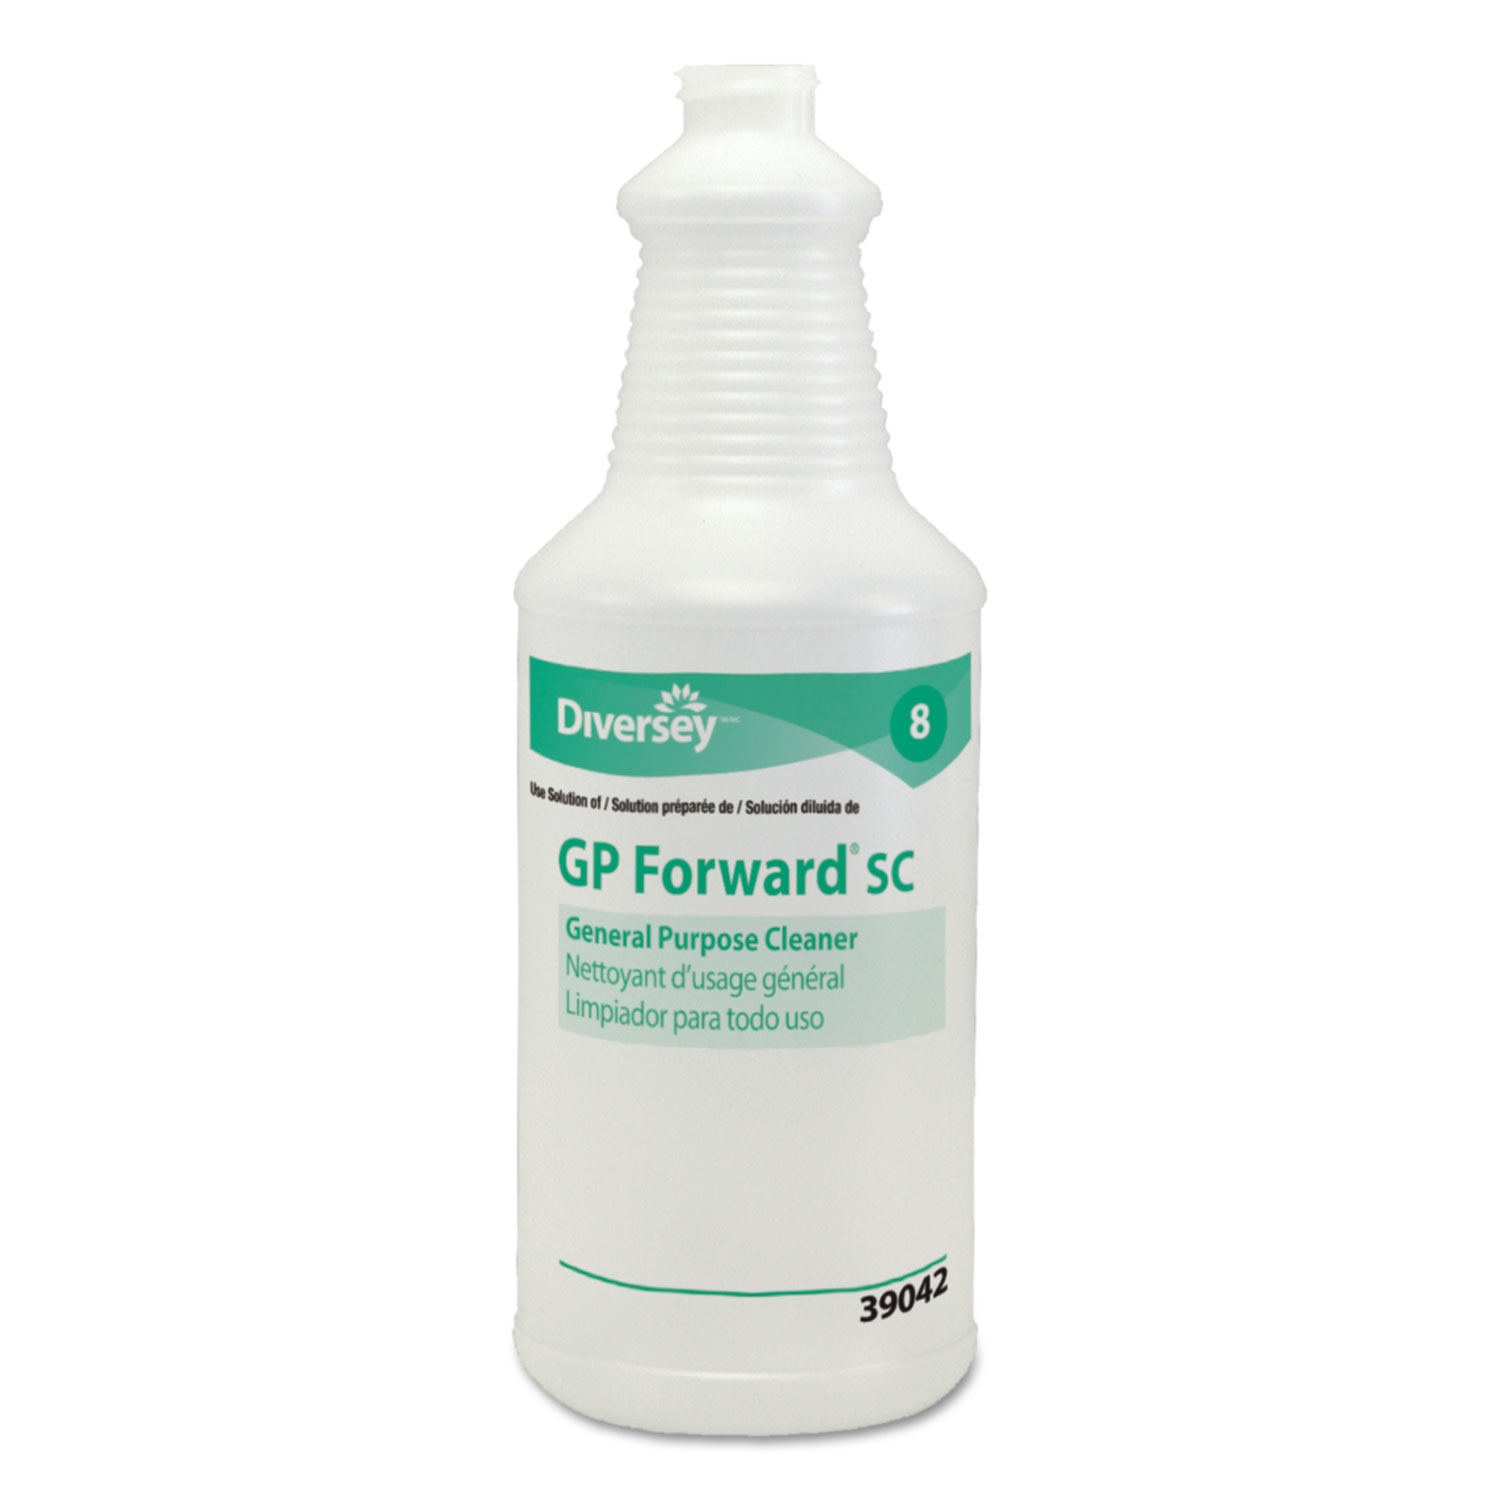 GP Forward Super Concentrated General Purpose Cleaner Capped Bottle, 32oz,12/CT